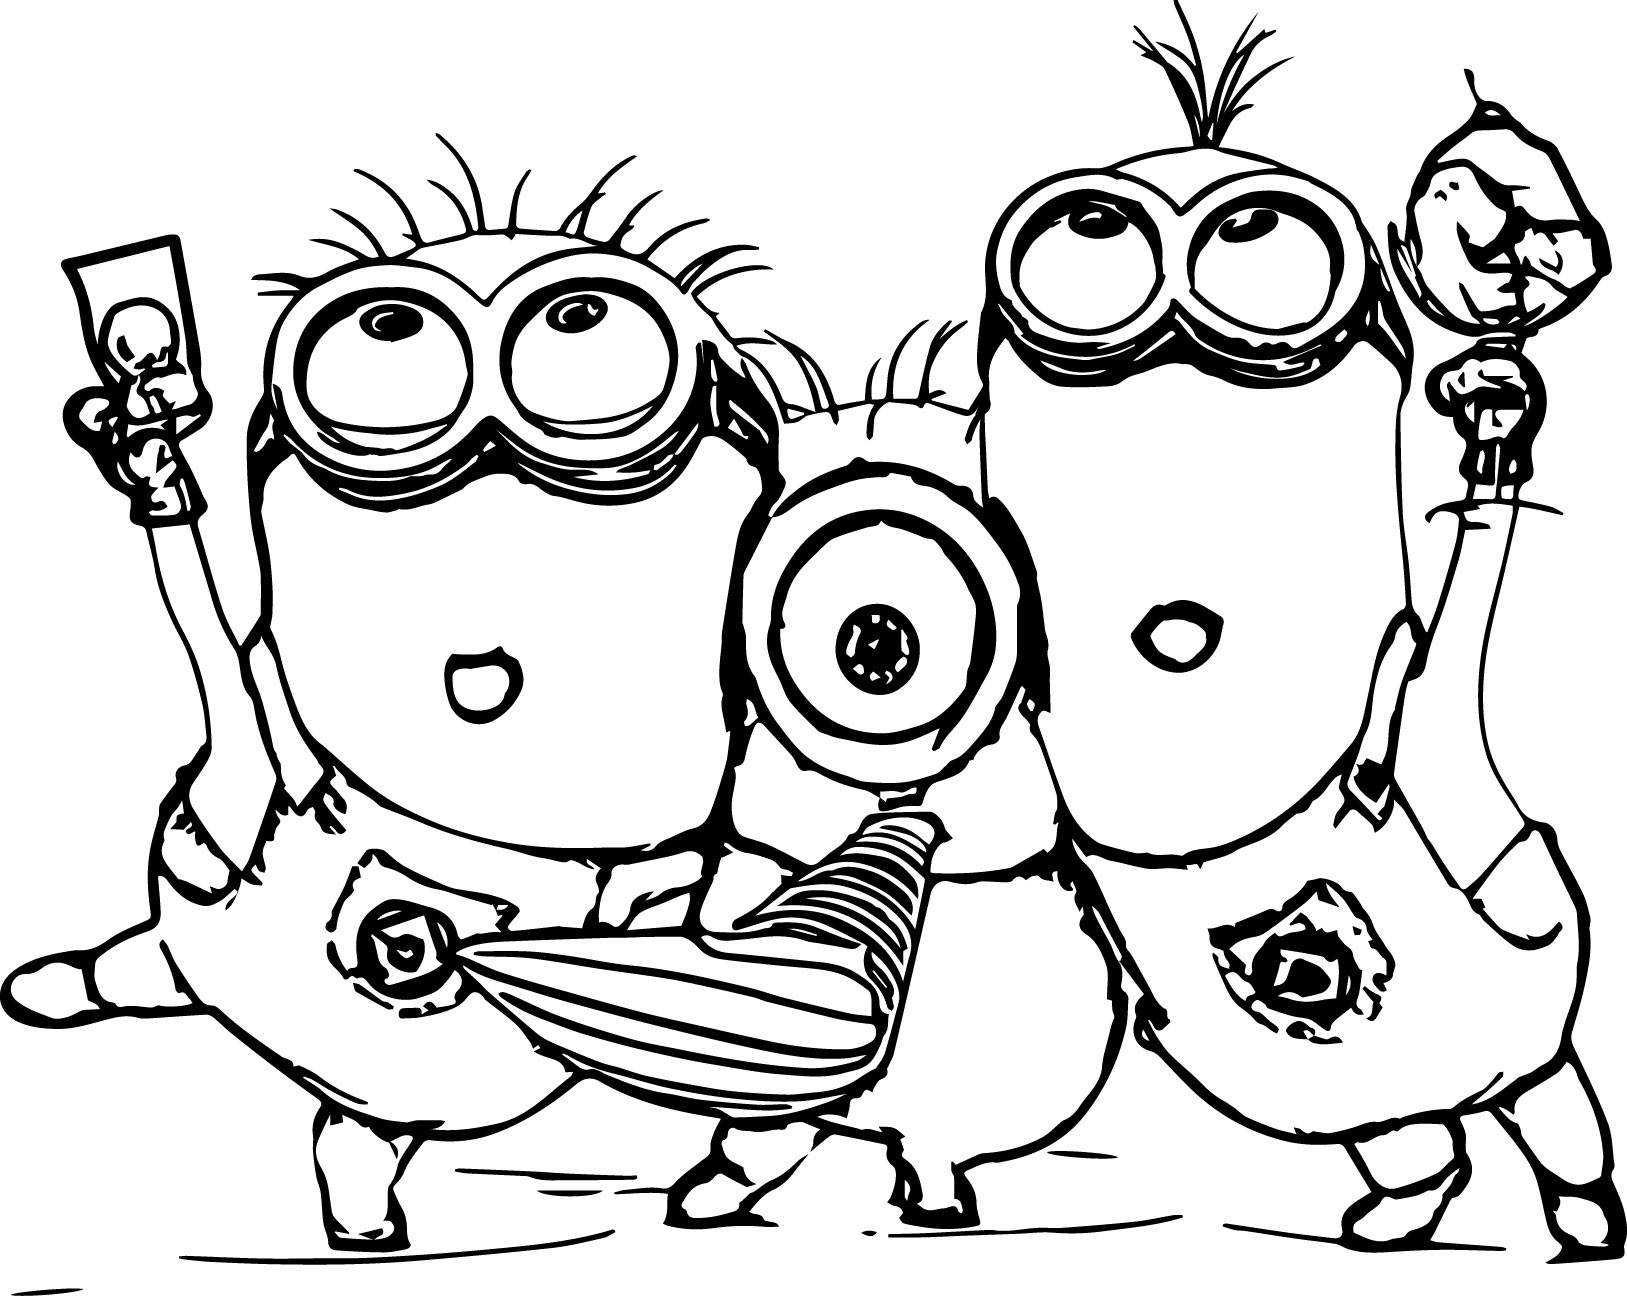 Free Printable Minion Coloring Pages
 Minion Coloring Pages Best Coloring Pages For Kids